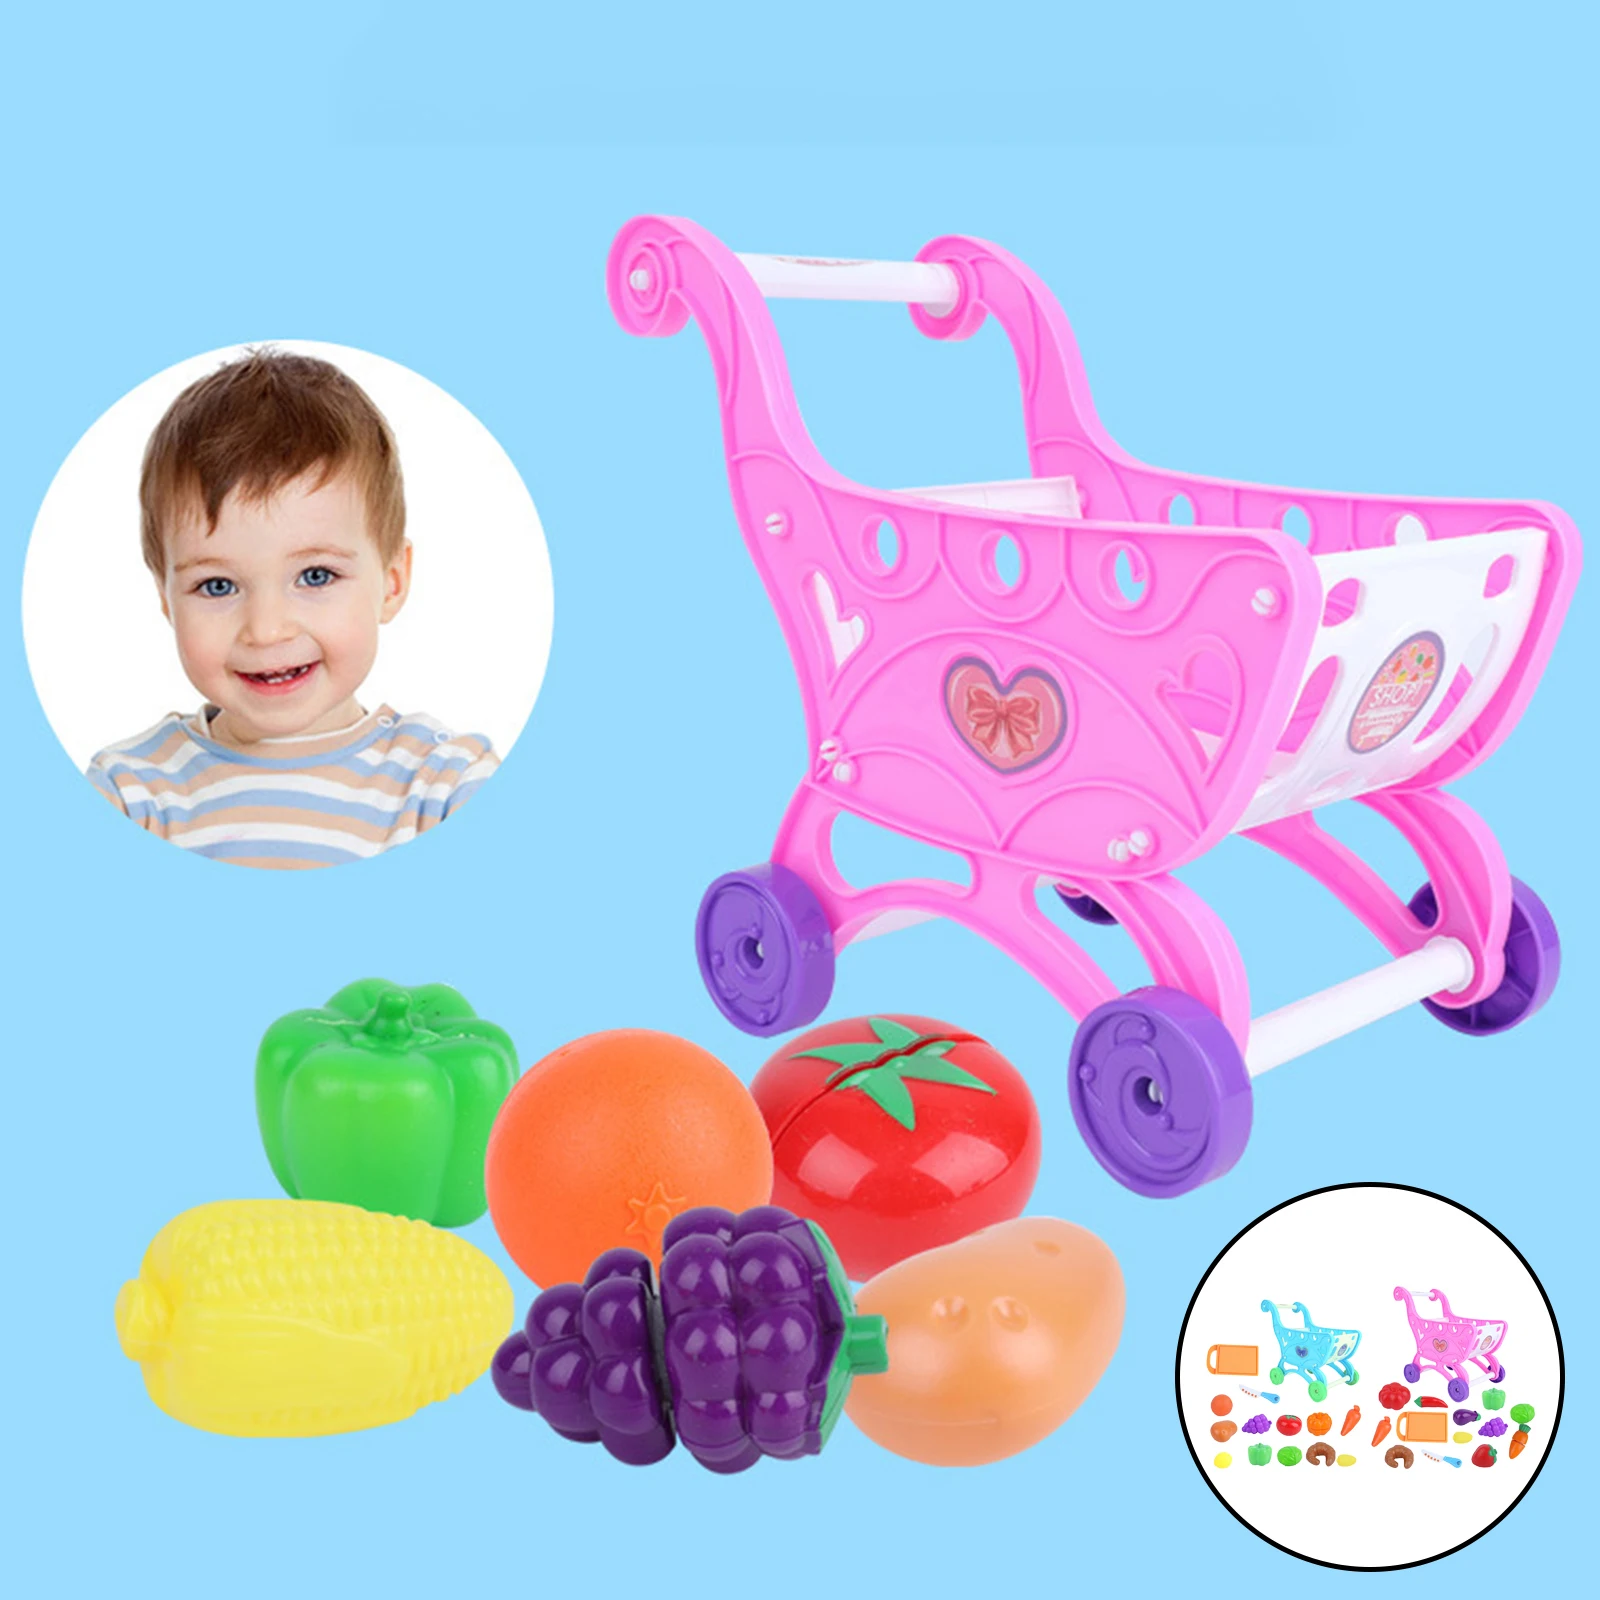 Mini Kid's Shopping Cart Supermarket Push Trolley Toy Role Play Toy for Toddlers Ages 2 3 4 5 6 Years Old best handwriting for ages 5 6